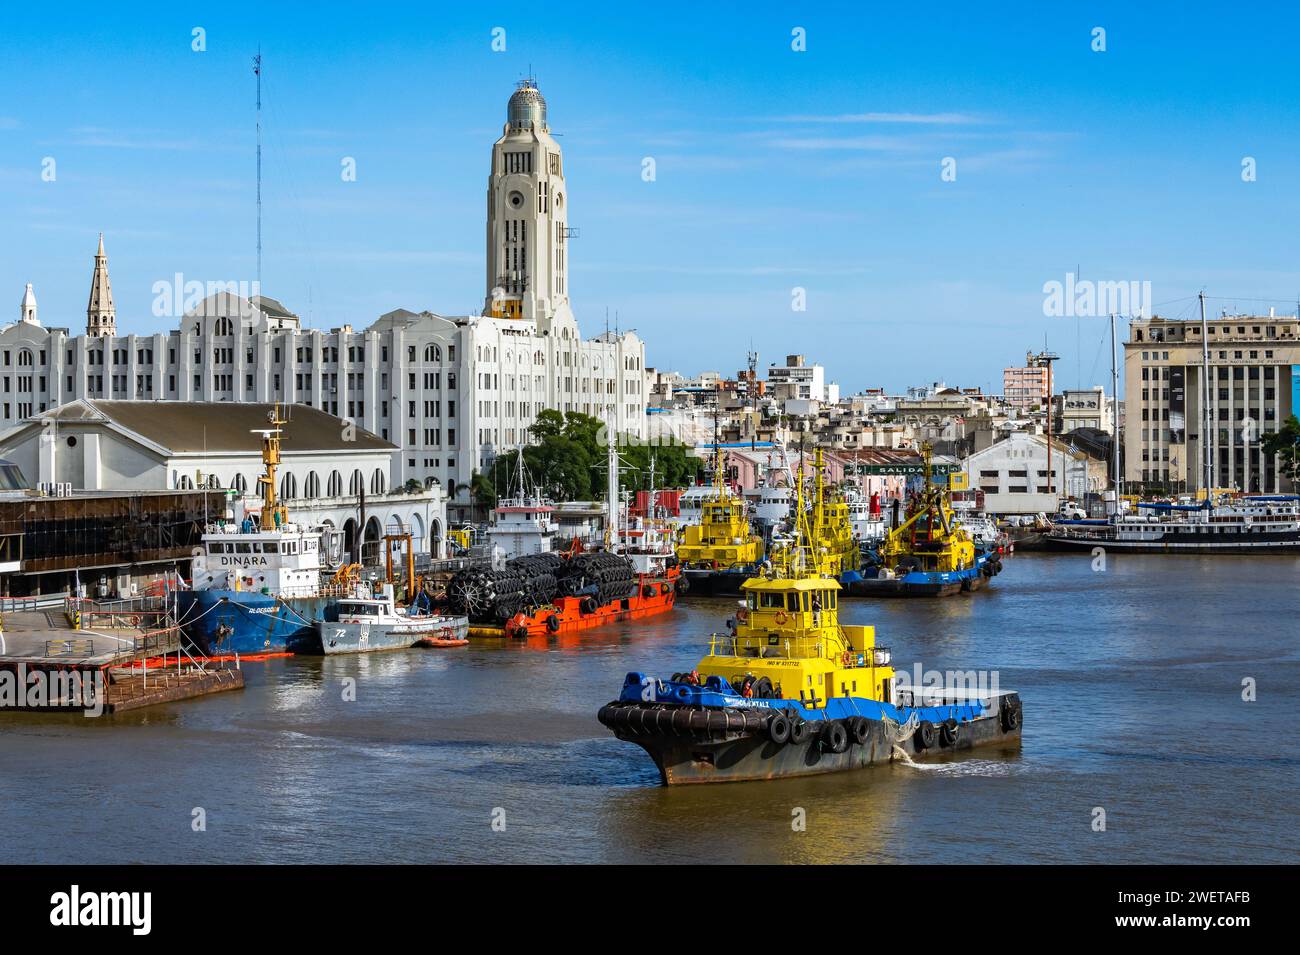 The Custom Building overlooking ships at busy port of Montevideo, Uruguay. Stock Photo